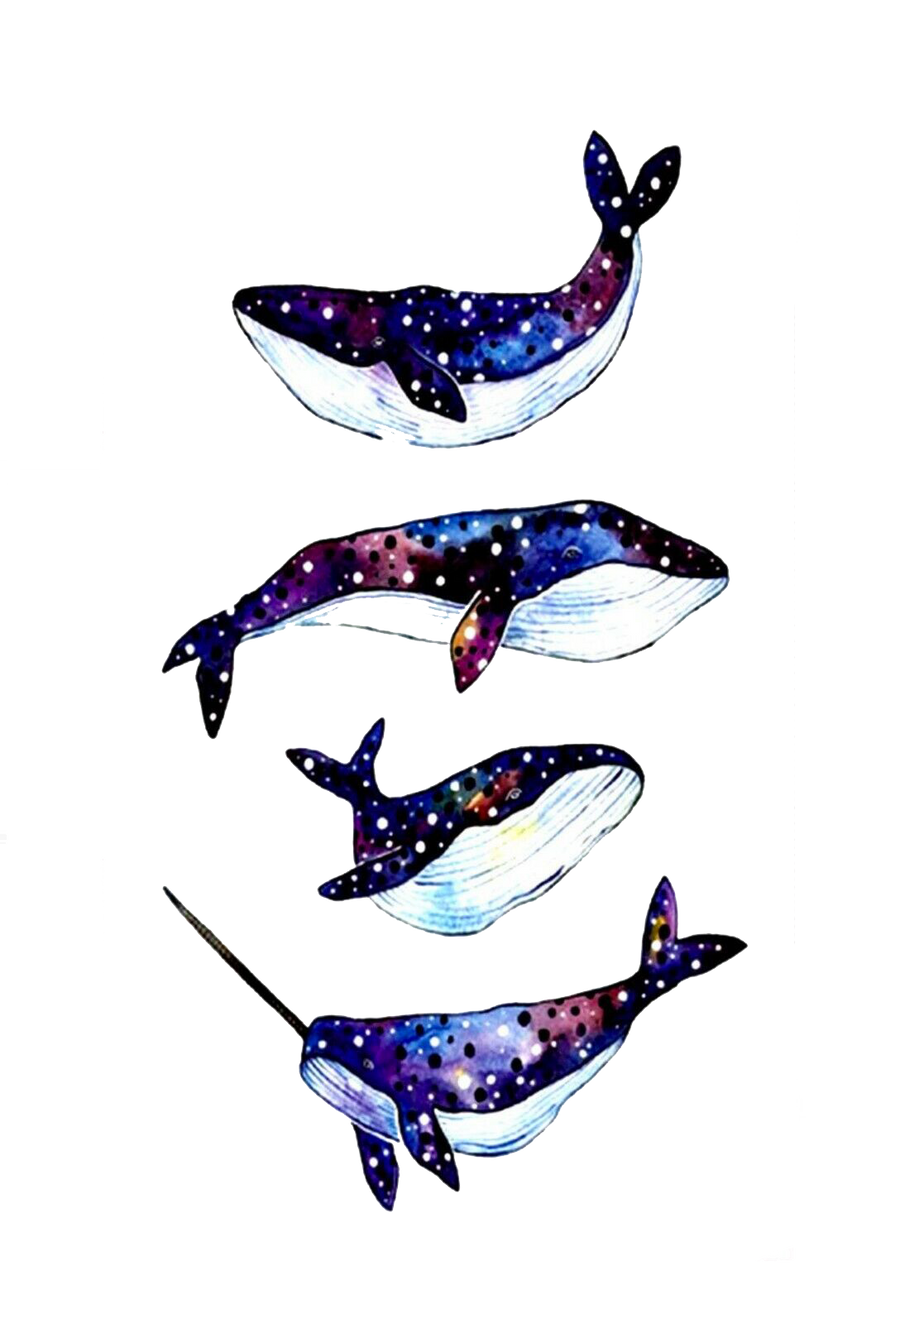 Stellar Seas: Celestial Whales and Narwhal